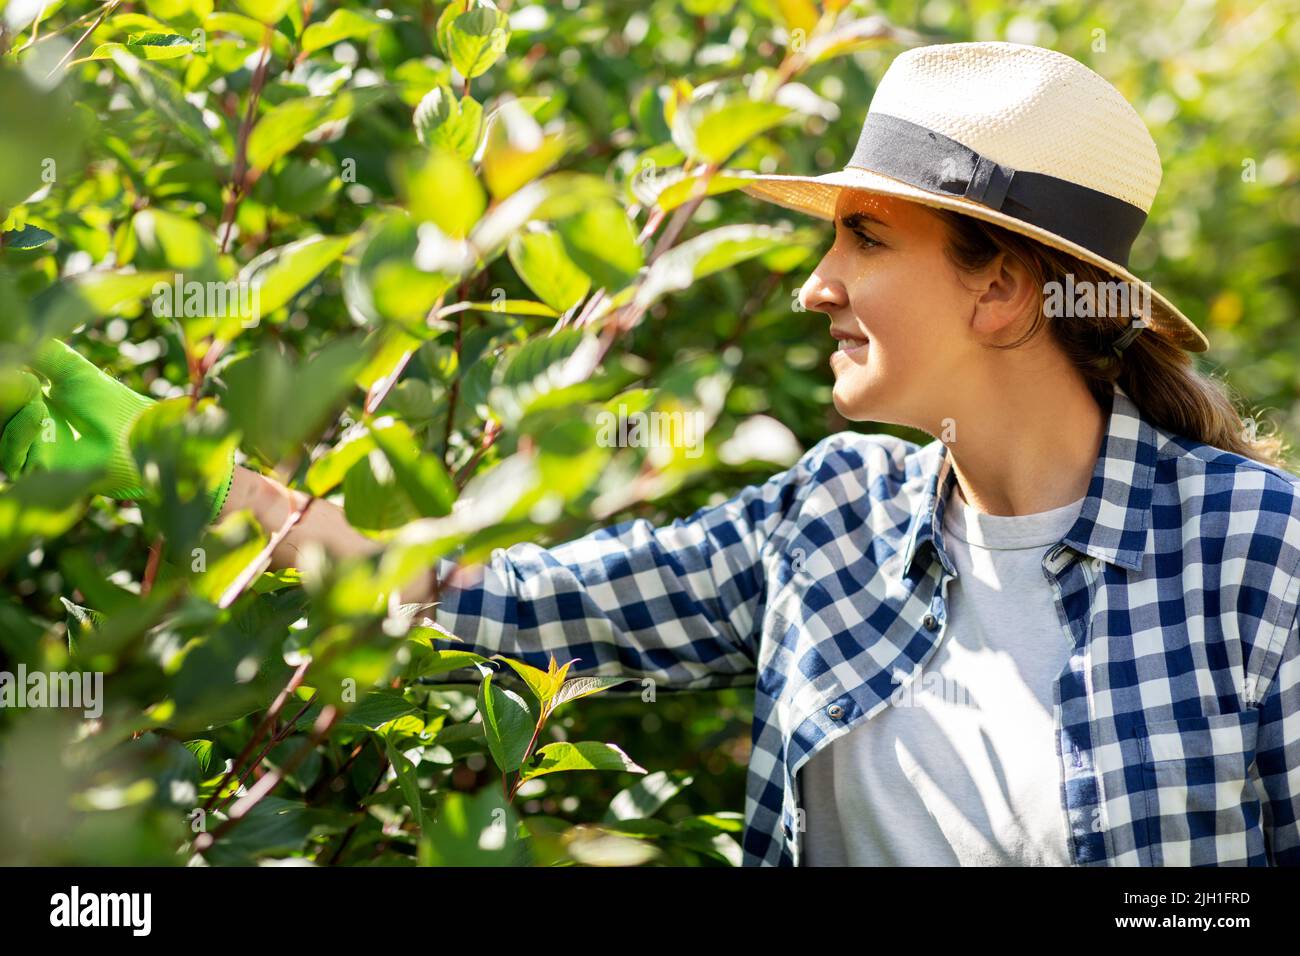 woman in hat working at summer garden Stock Photo